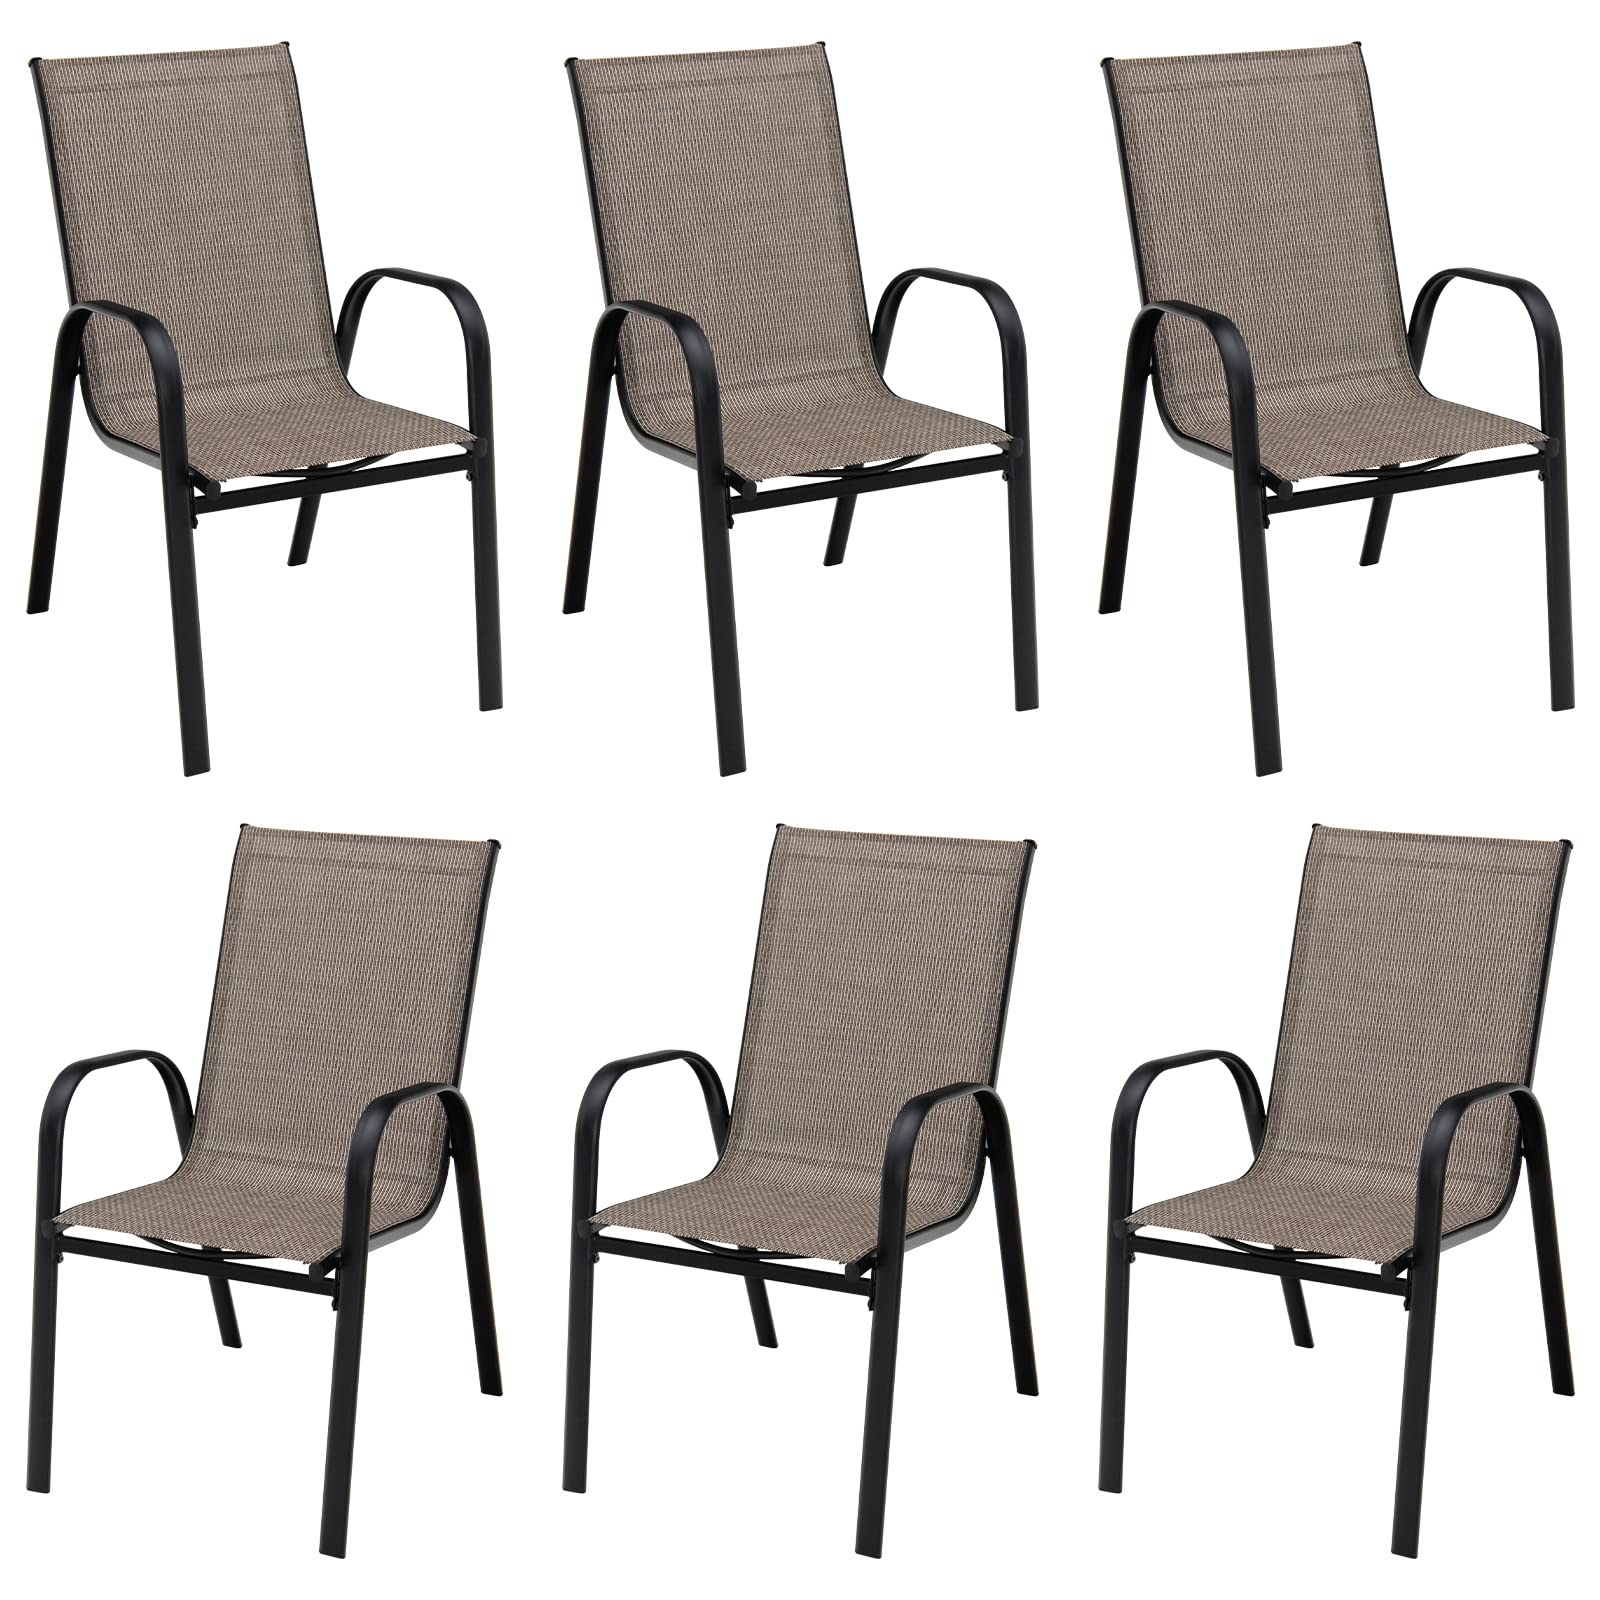 Giantex Set of 6 Patio Chairs, Stackable Outdoor Dining Chairs, with Curved Armrests and Breathable Fabric